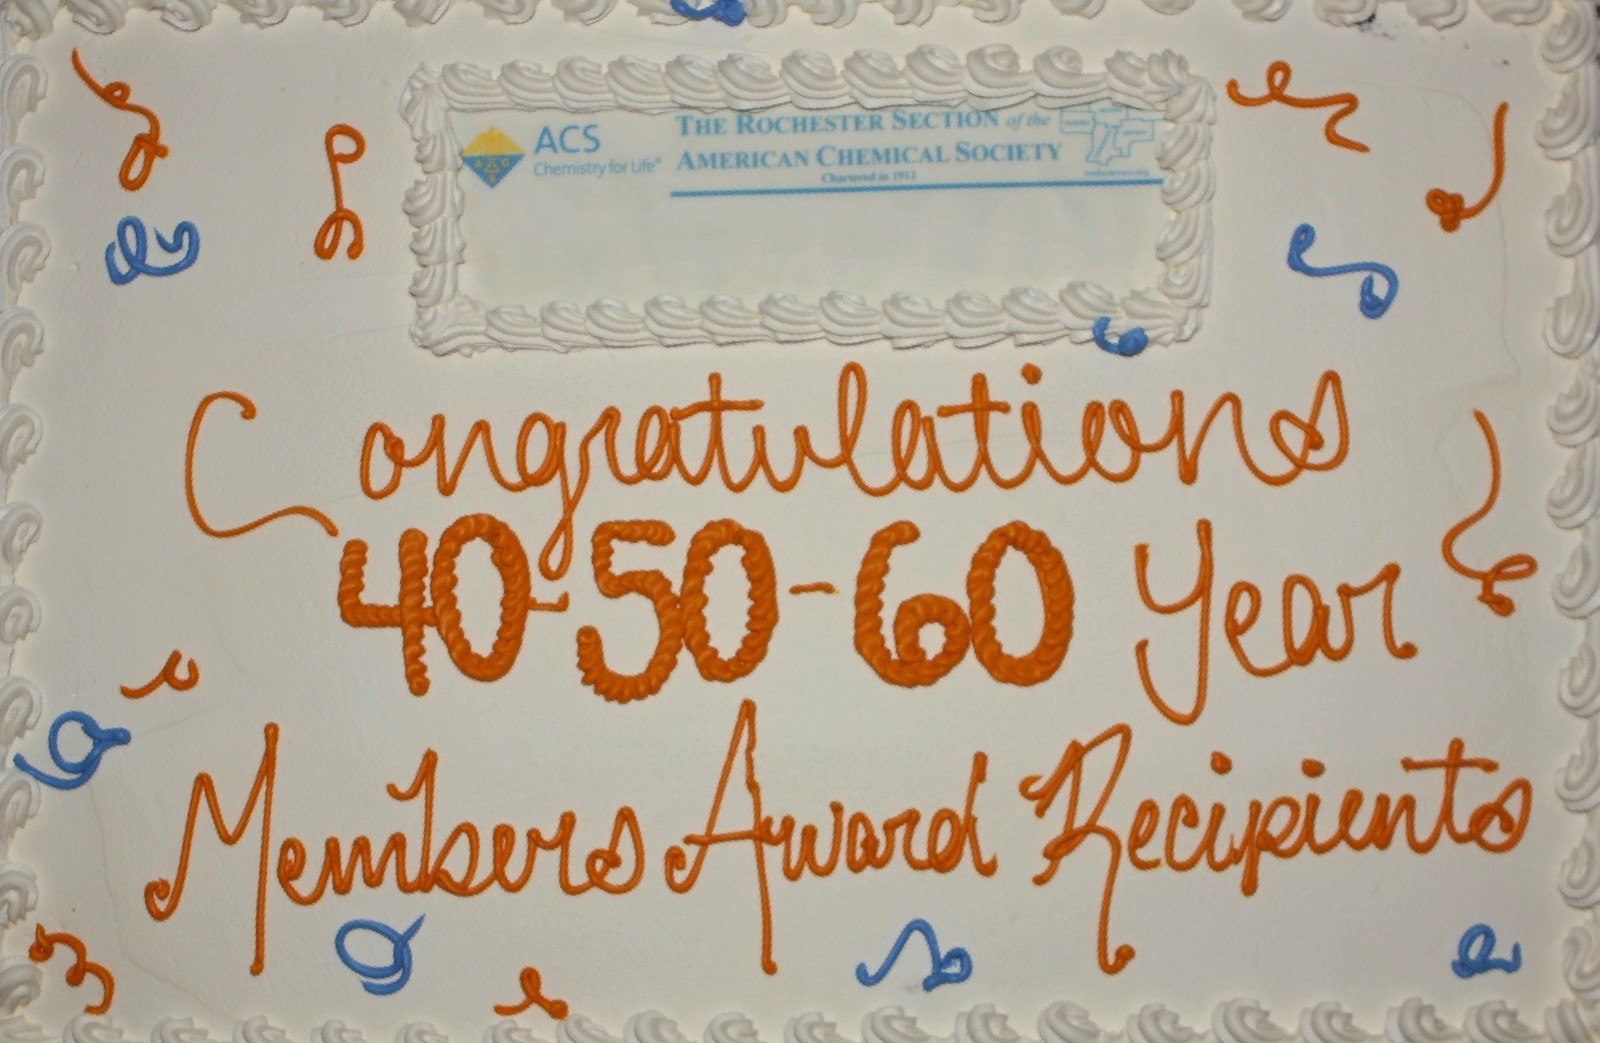 ACS 40, 50, 60 year Recognition